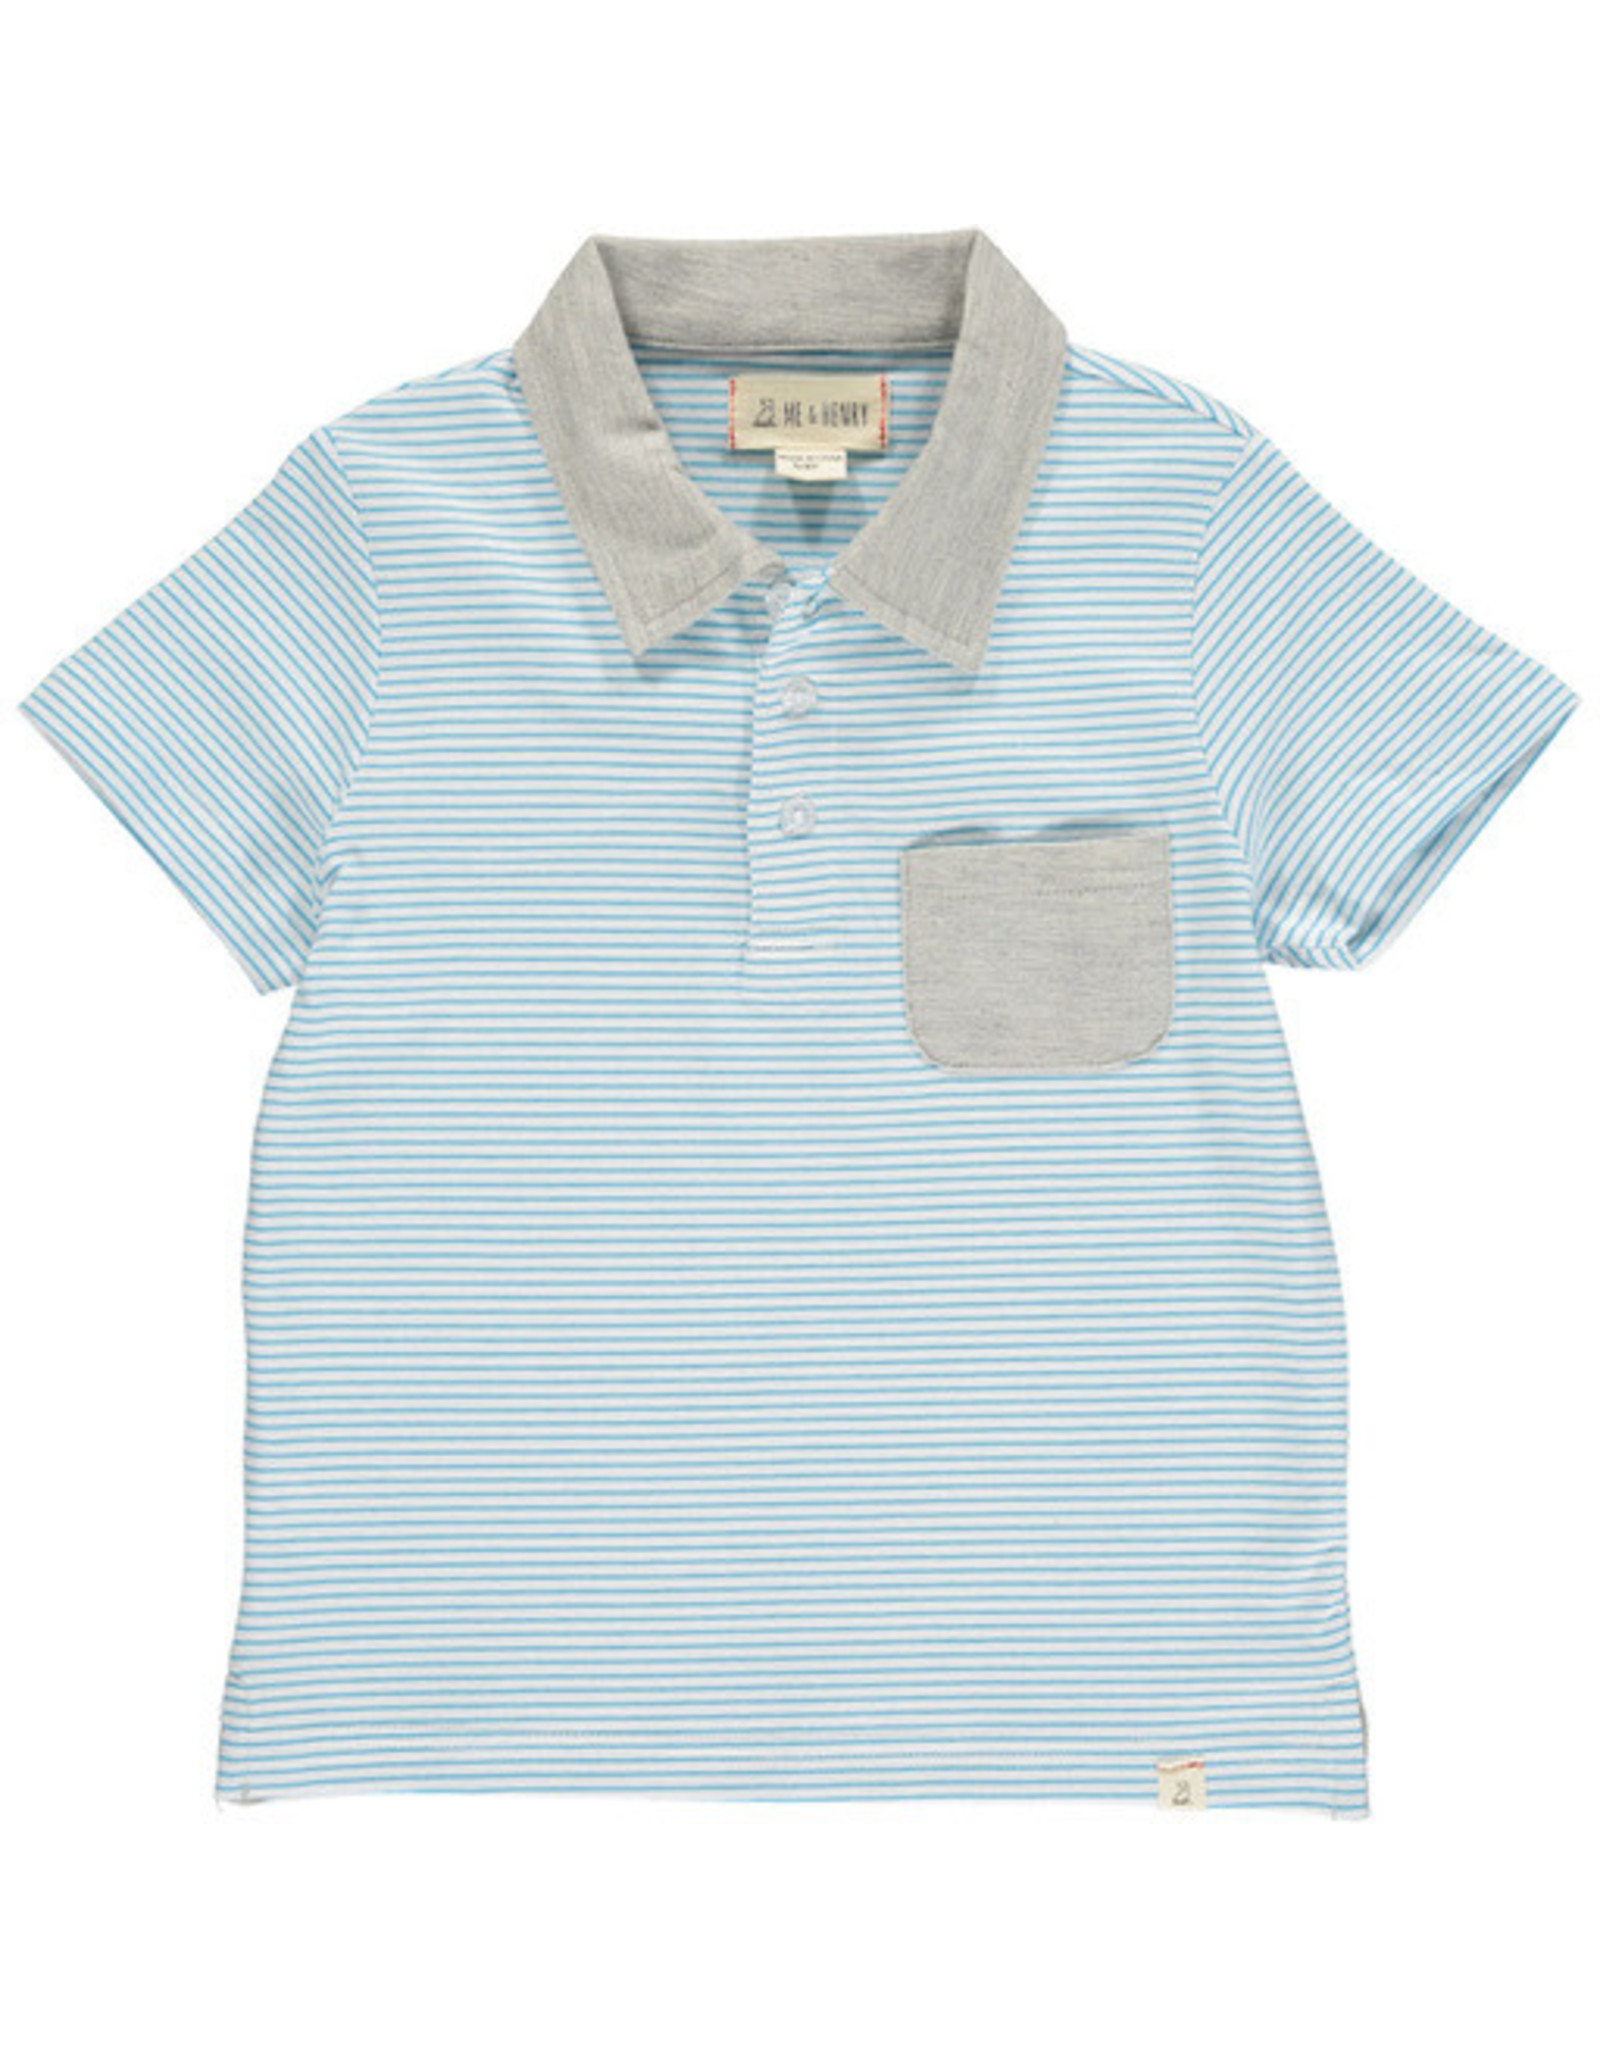 Me & Henry Halyard Polo - Blue/White